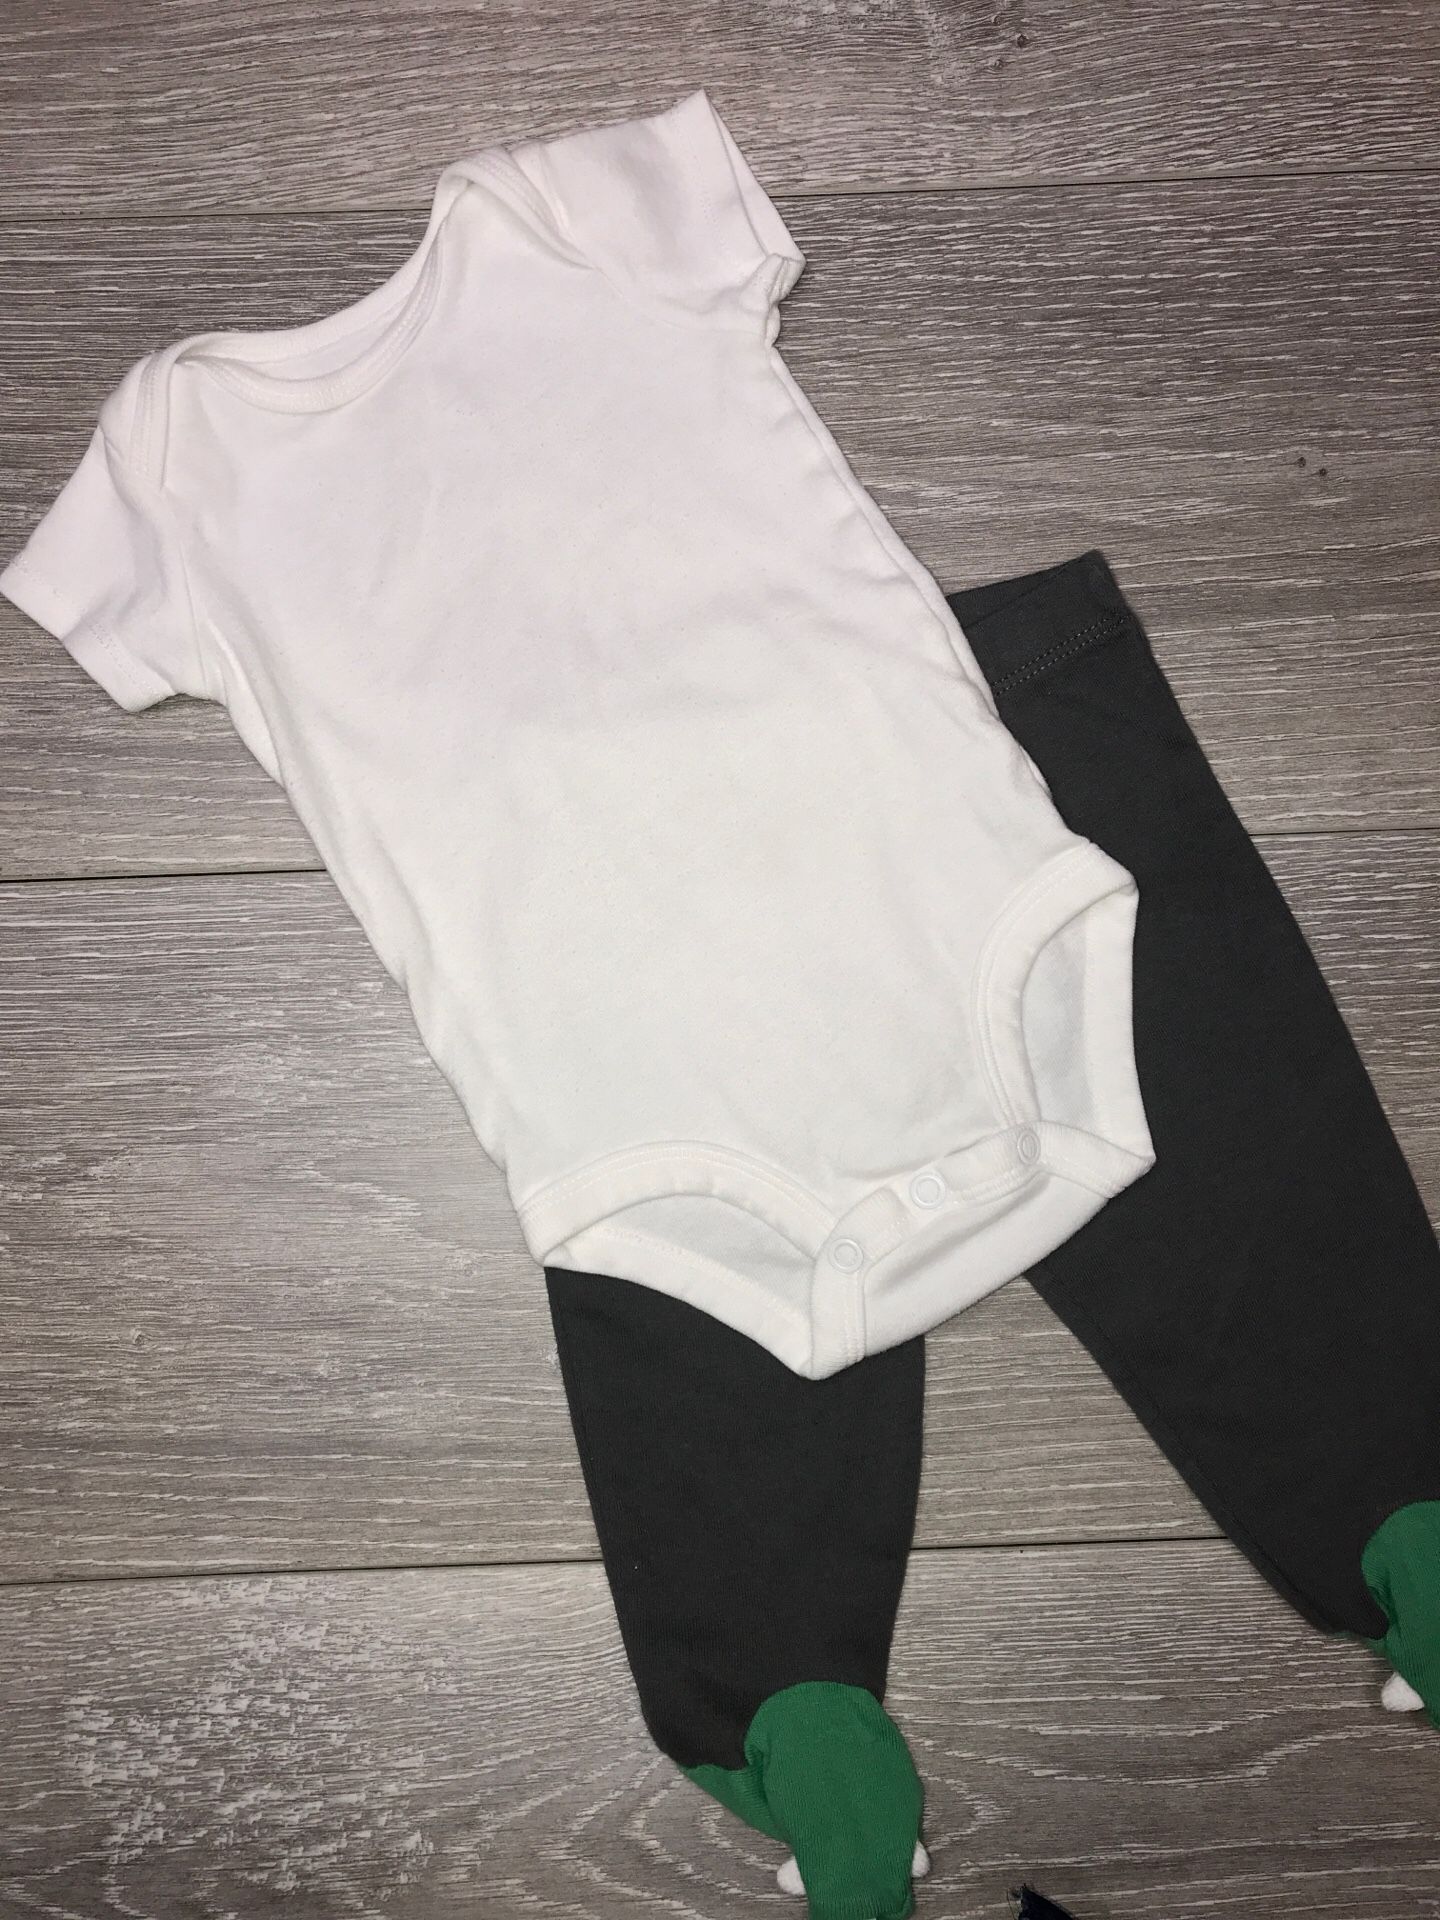 Baby Boy Clothing Carter’s 3 Months $2